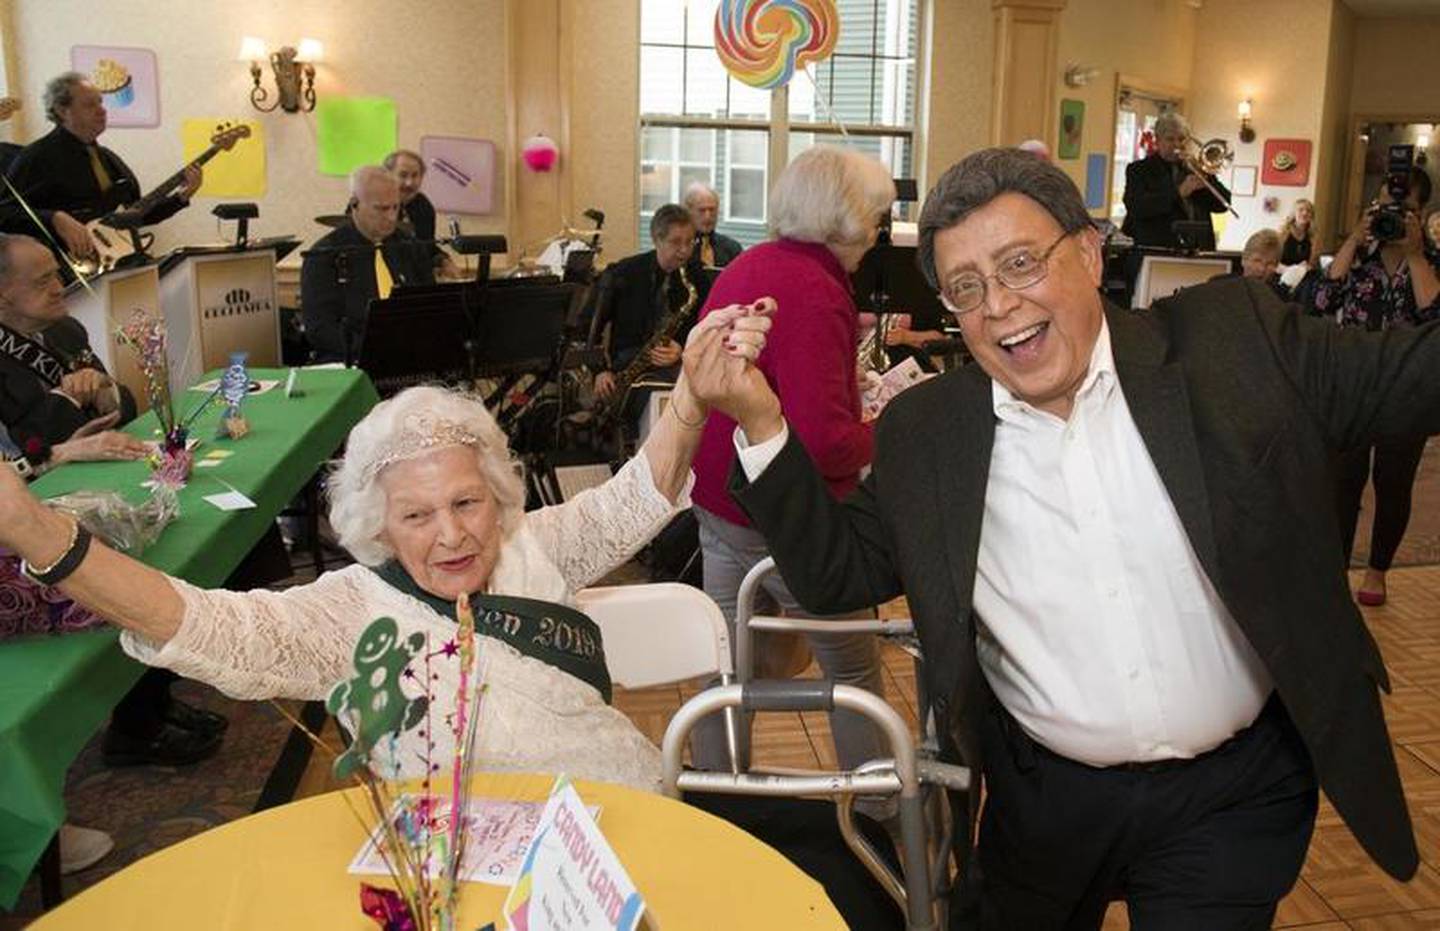 Josephine Ardizzone, 2019 prom queen dance with Edward Panelli during Timbers of Shorewood Annual Seniors' Senior Prom in Shorewood, IL Friday, June 21, 2019. Live big band music was provided by the Del Bergeson Orchestra. Members of the orchestra are 30-plus year music professionals, each with a deep passion for music and entertaining. Teenage “chaperones” were on hand as helpers and dance partners. The teens were from Joliet, Plainfield, Minooka, and Shorewood area high schools.